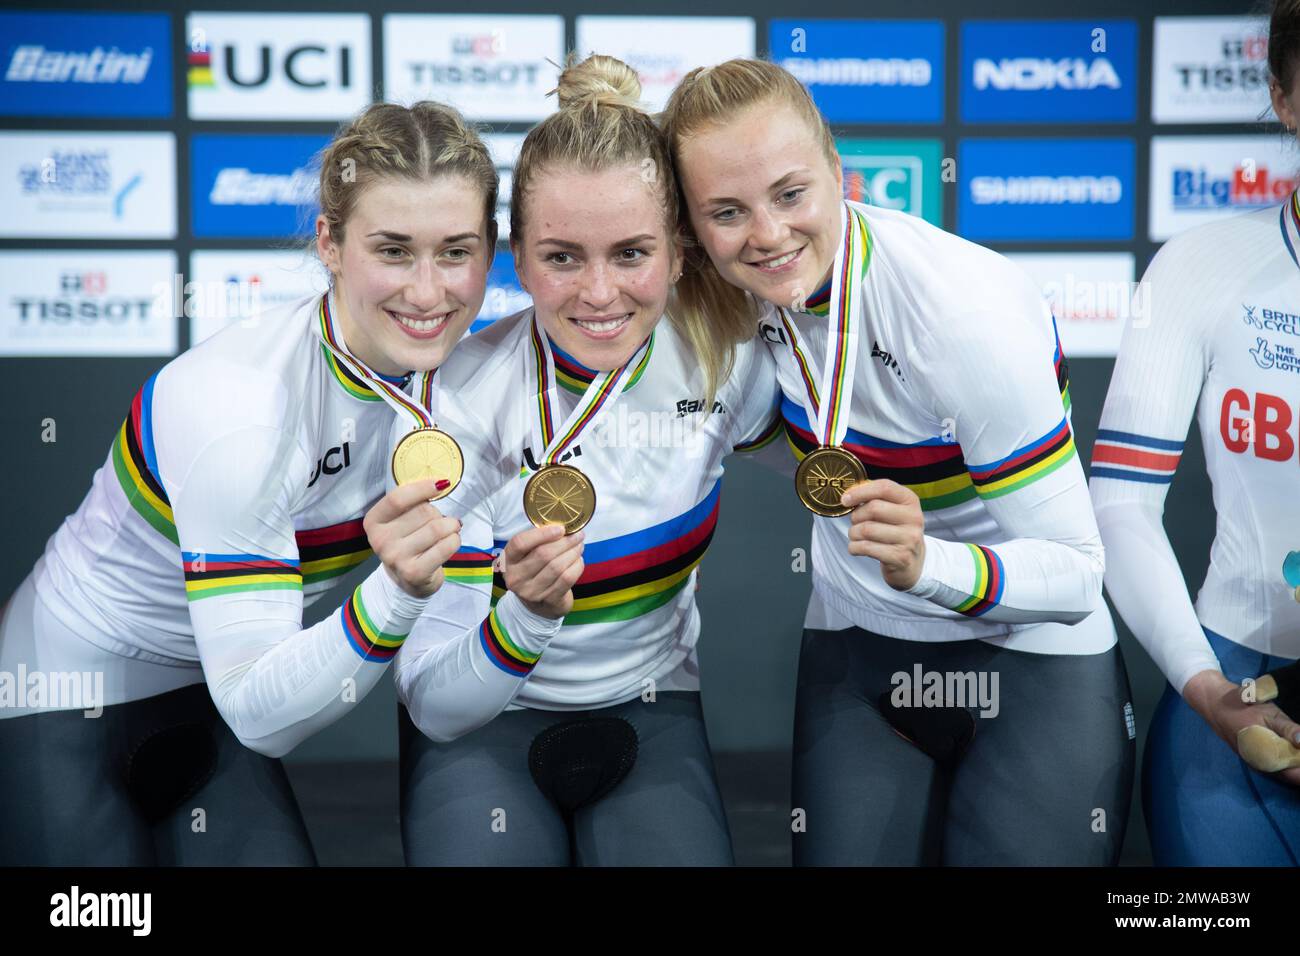 The German women's team sprint world champions on the podium with their gold medals. Pauline Grabosch(L), Emma Hinze, and Lea Sophie Friedrich(R). Stock Photo